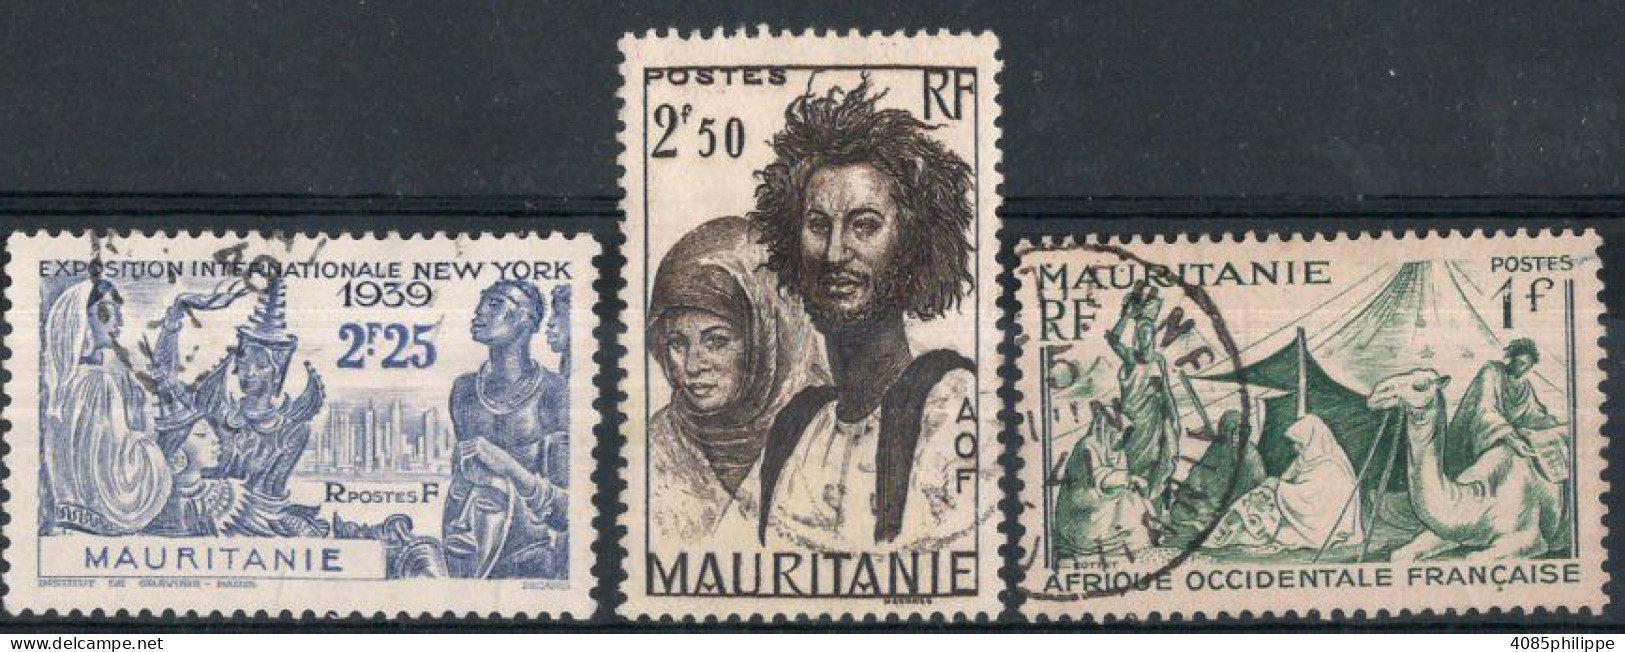 Mauritanie Timbres-poste N°99, 110 & 115 Oblitérés TB Cote : 3€75 - Used Stamps